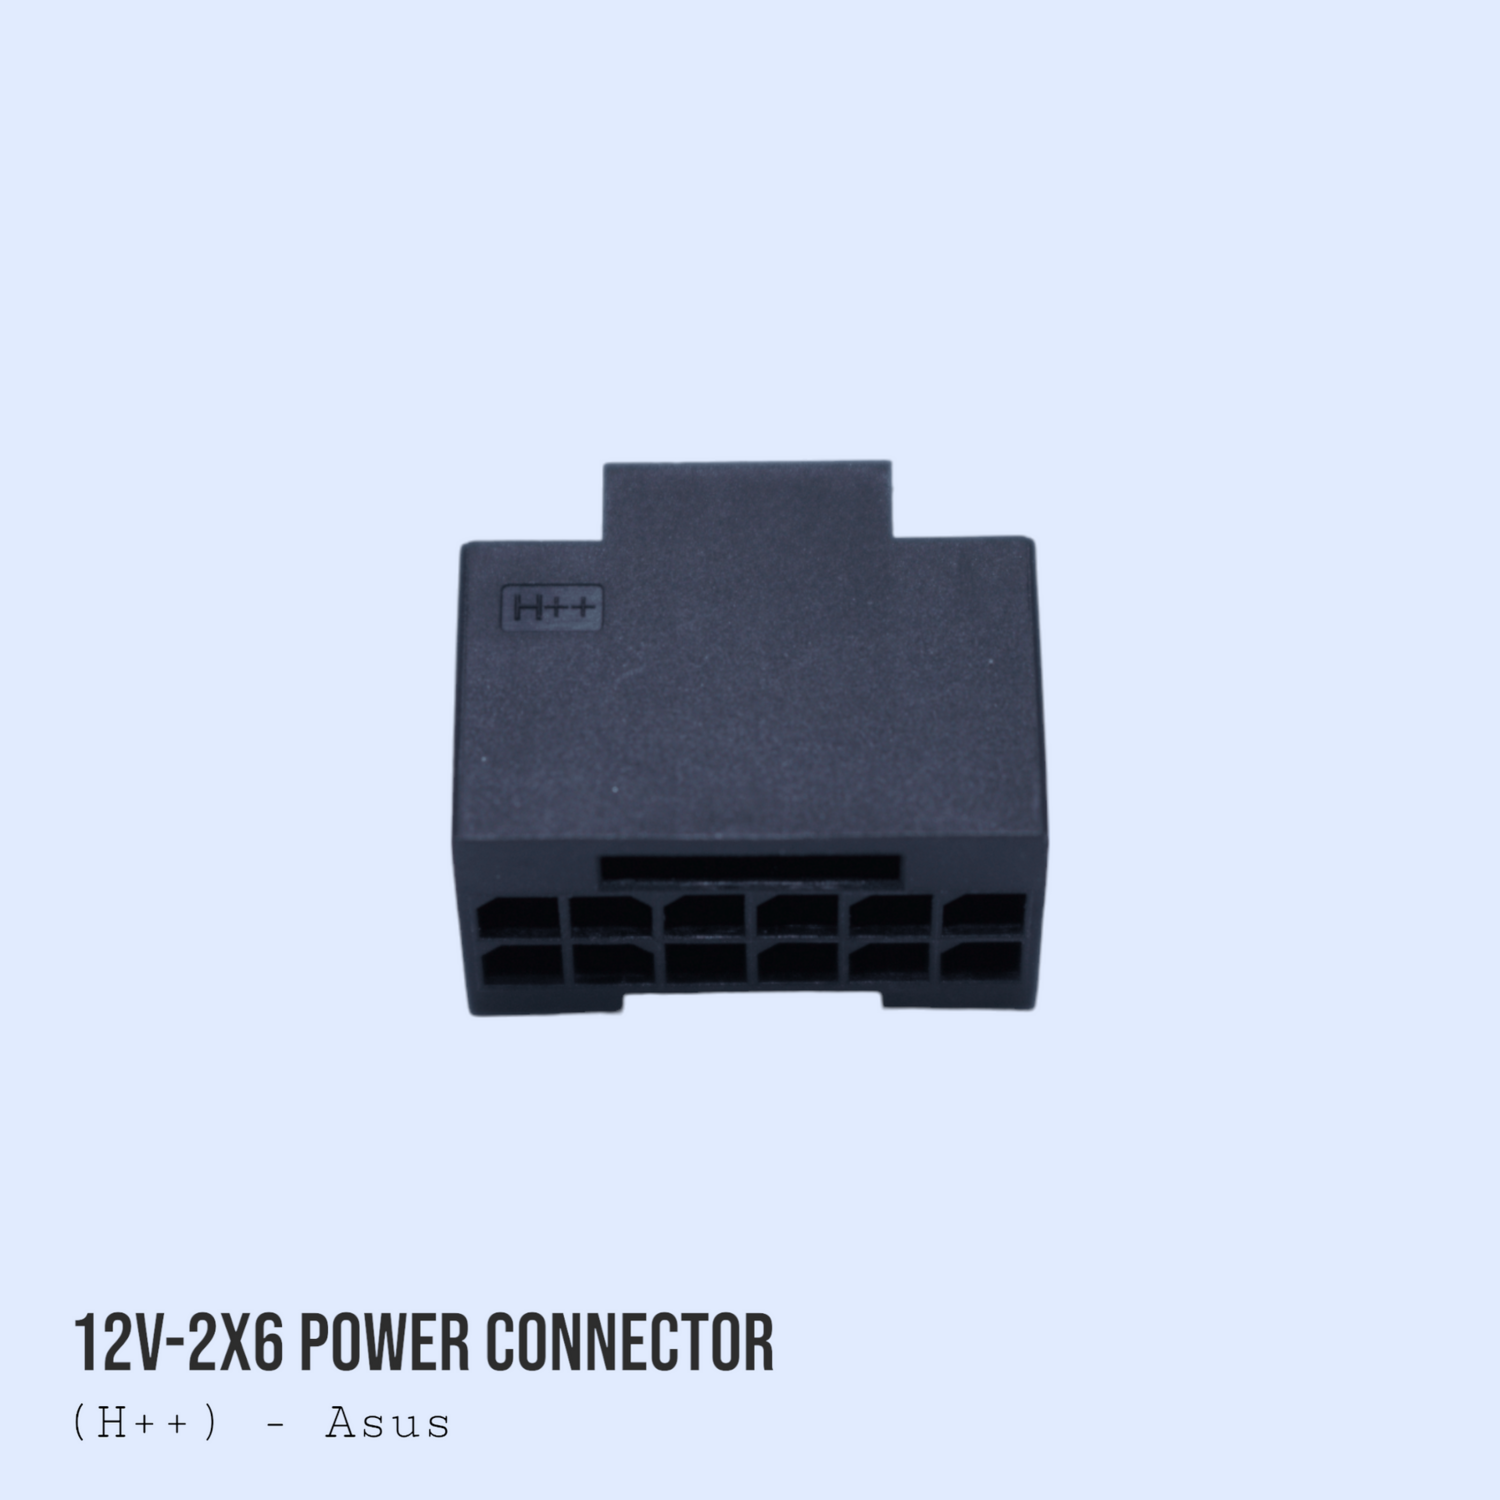 12V-2x6 Power connector (H++) - Asus
